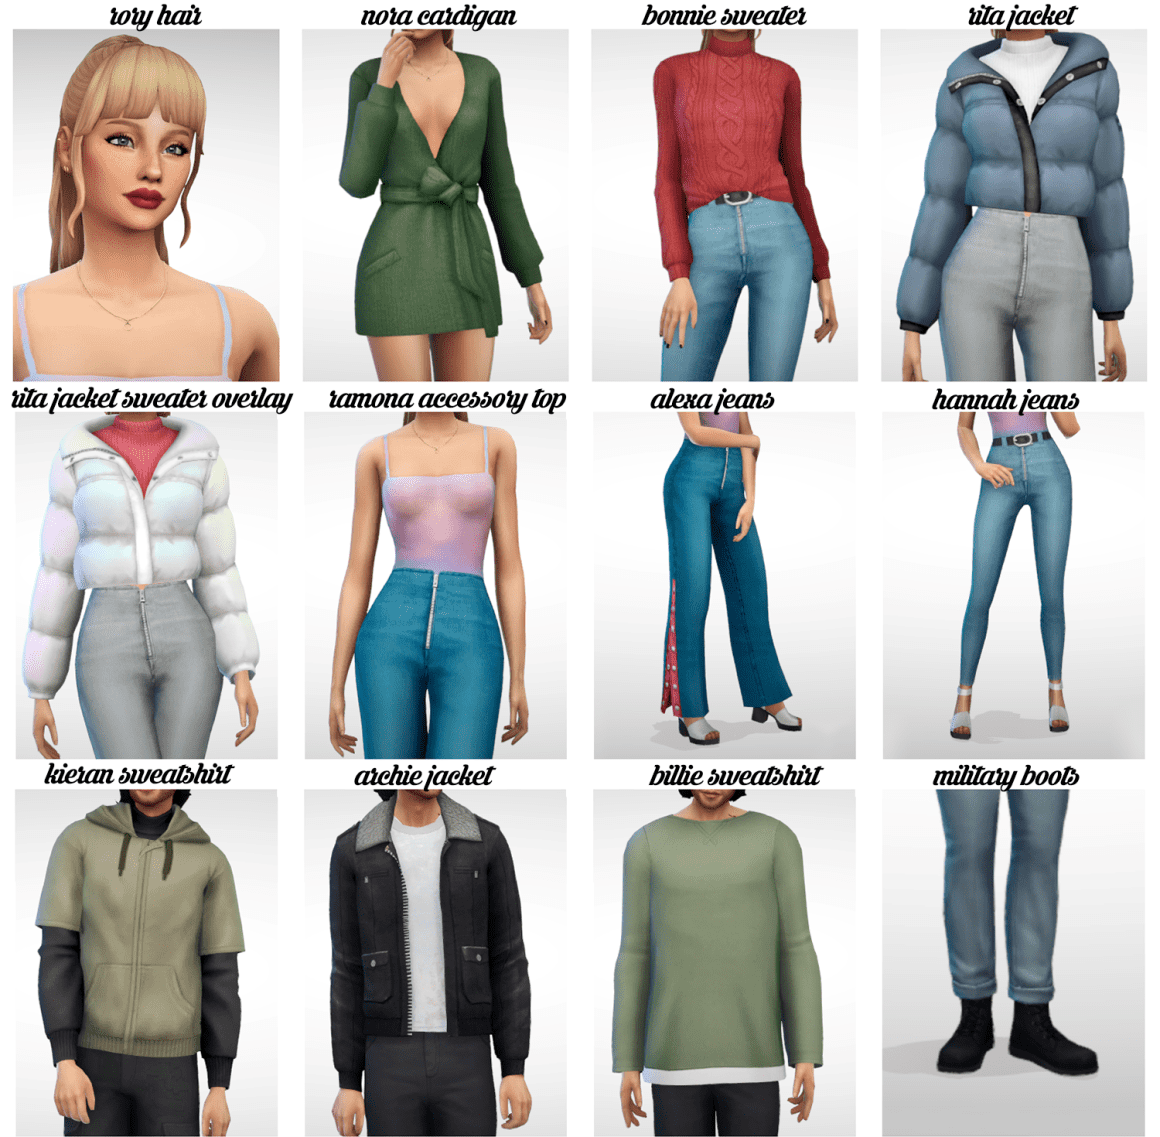 Sims 4 Winter Clothes Collection